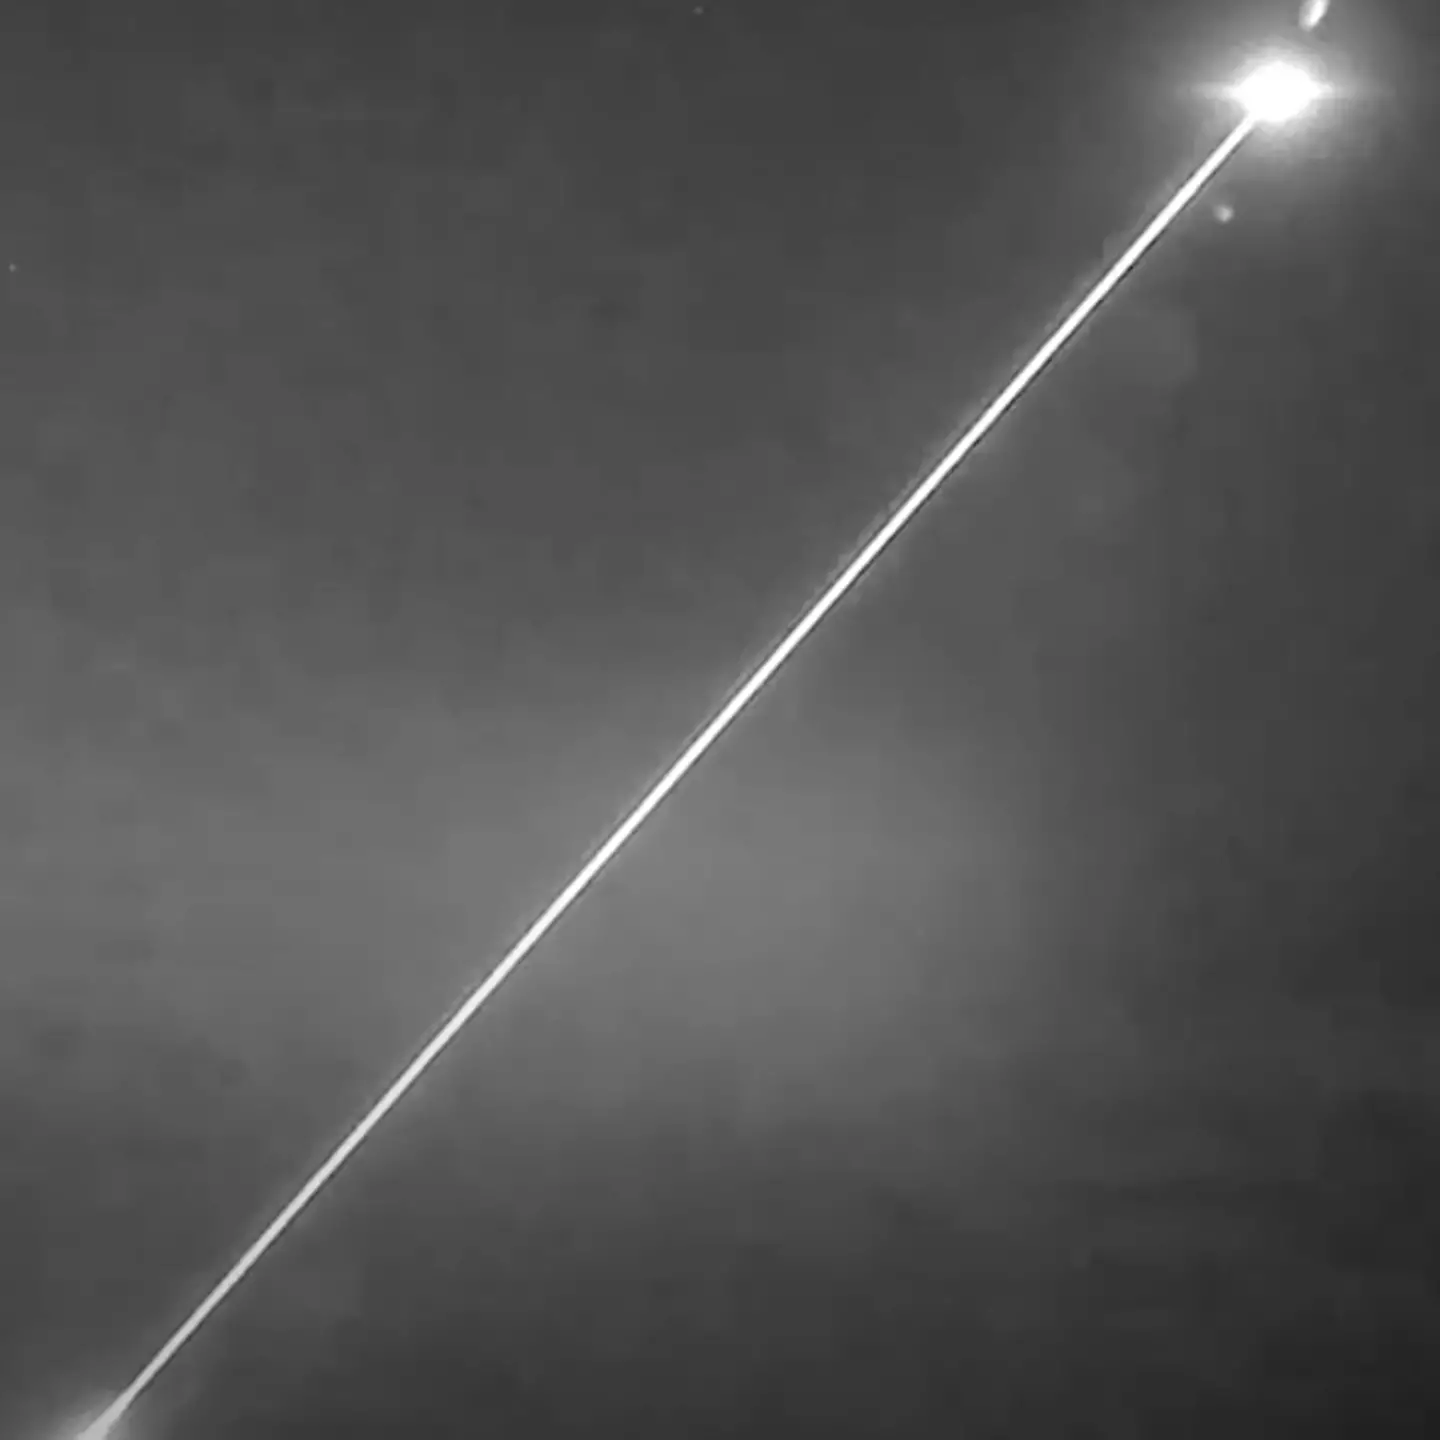 Watch declassified video of DragonFire laser zapping an aerial target